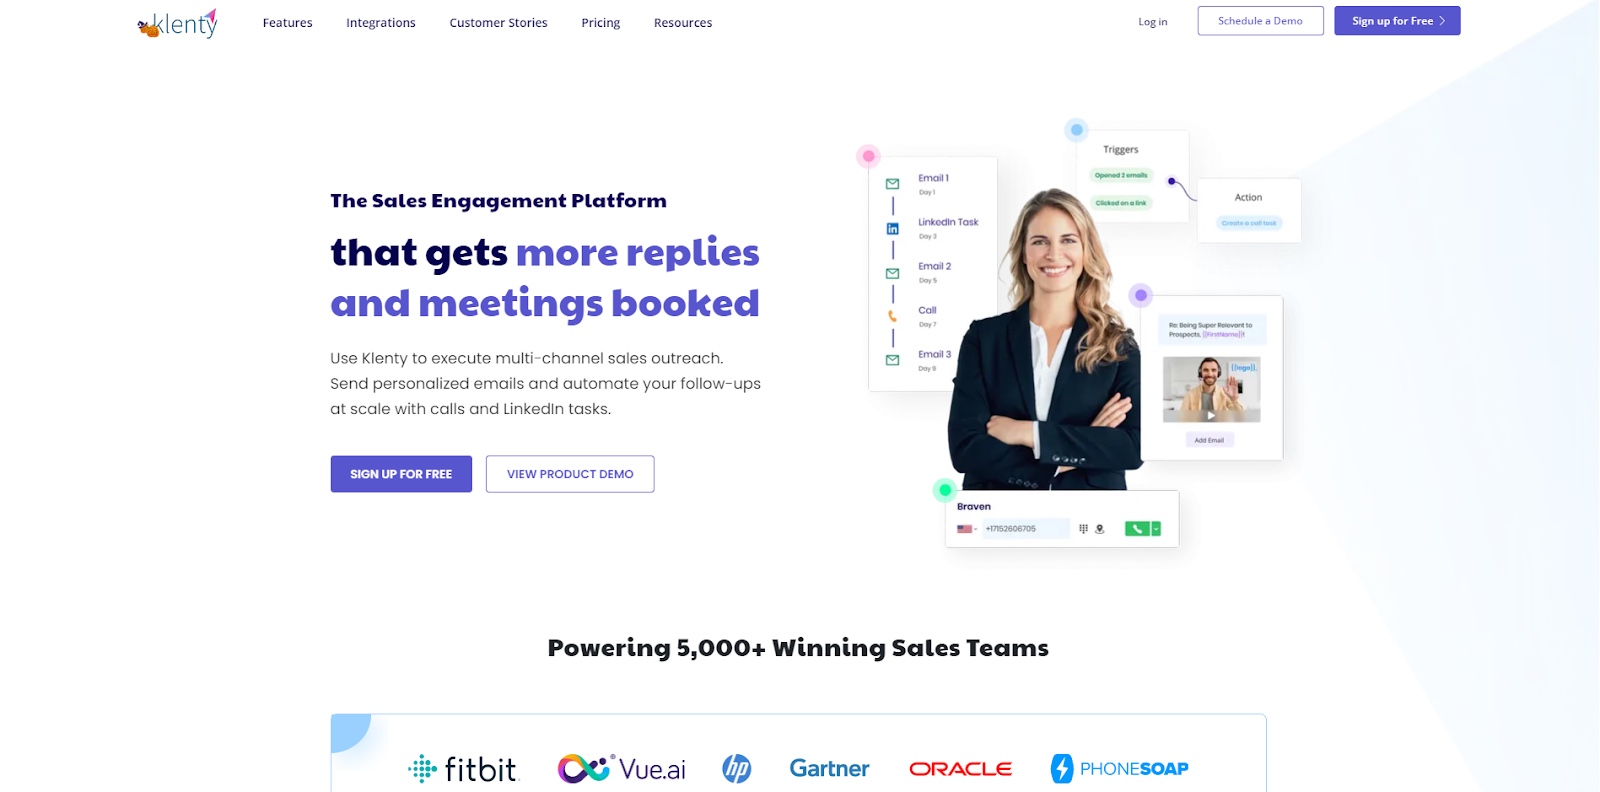 Sales enablement software by Paperflite